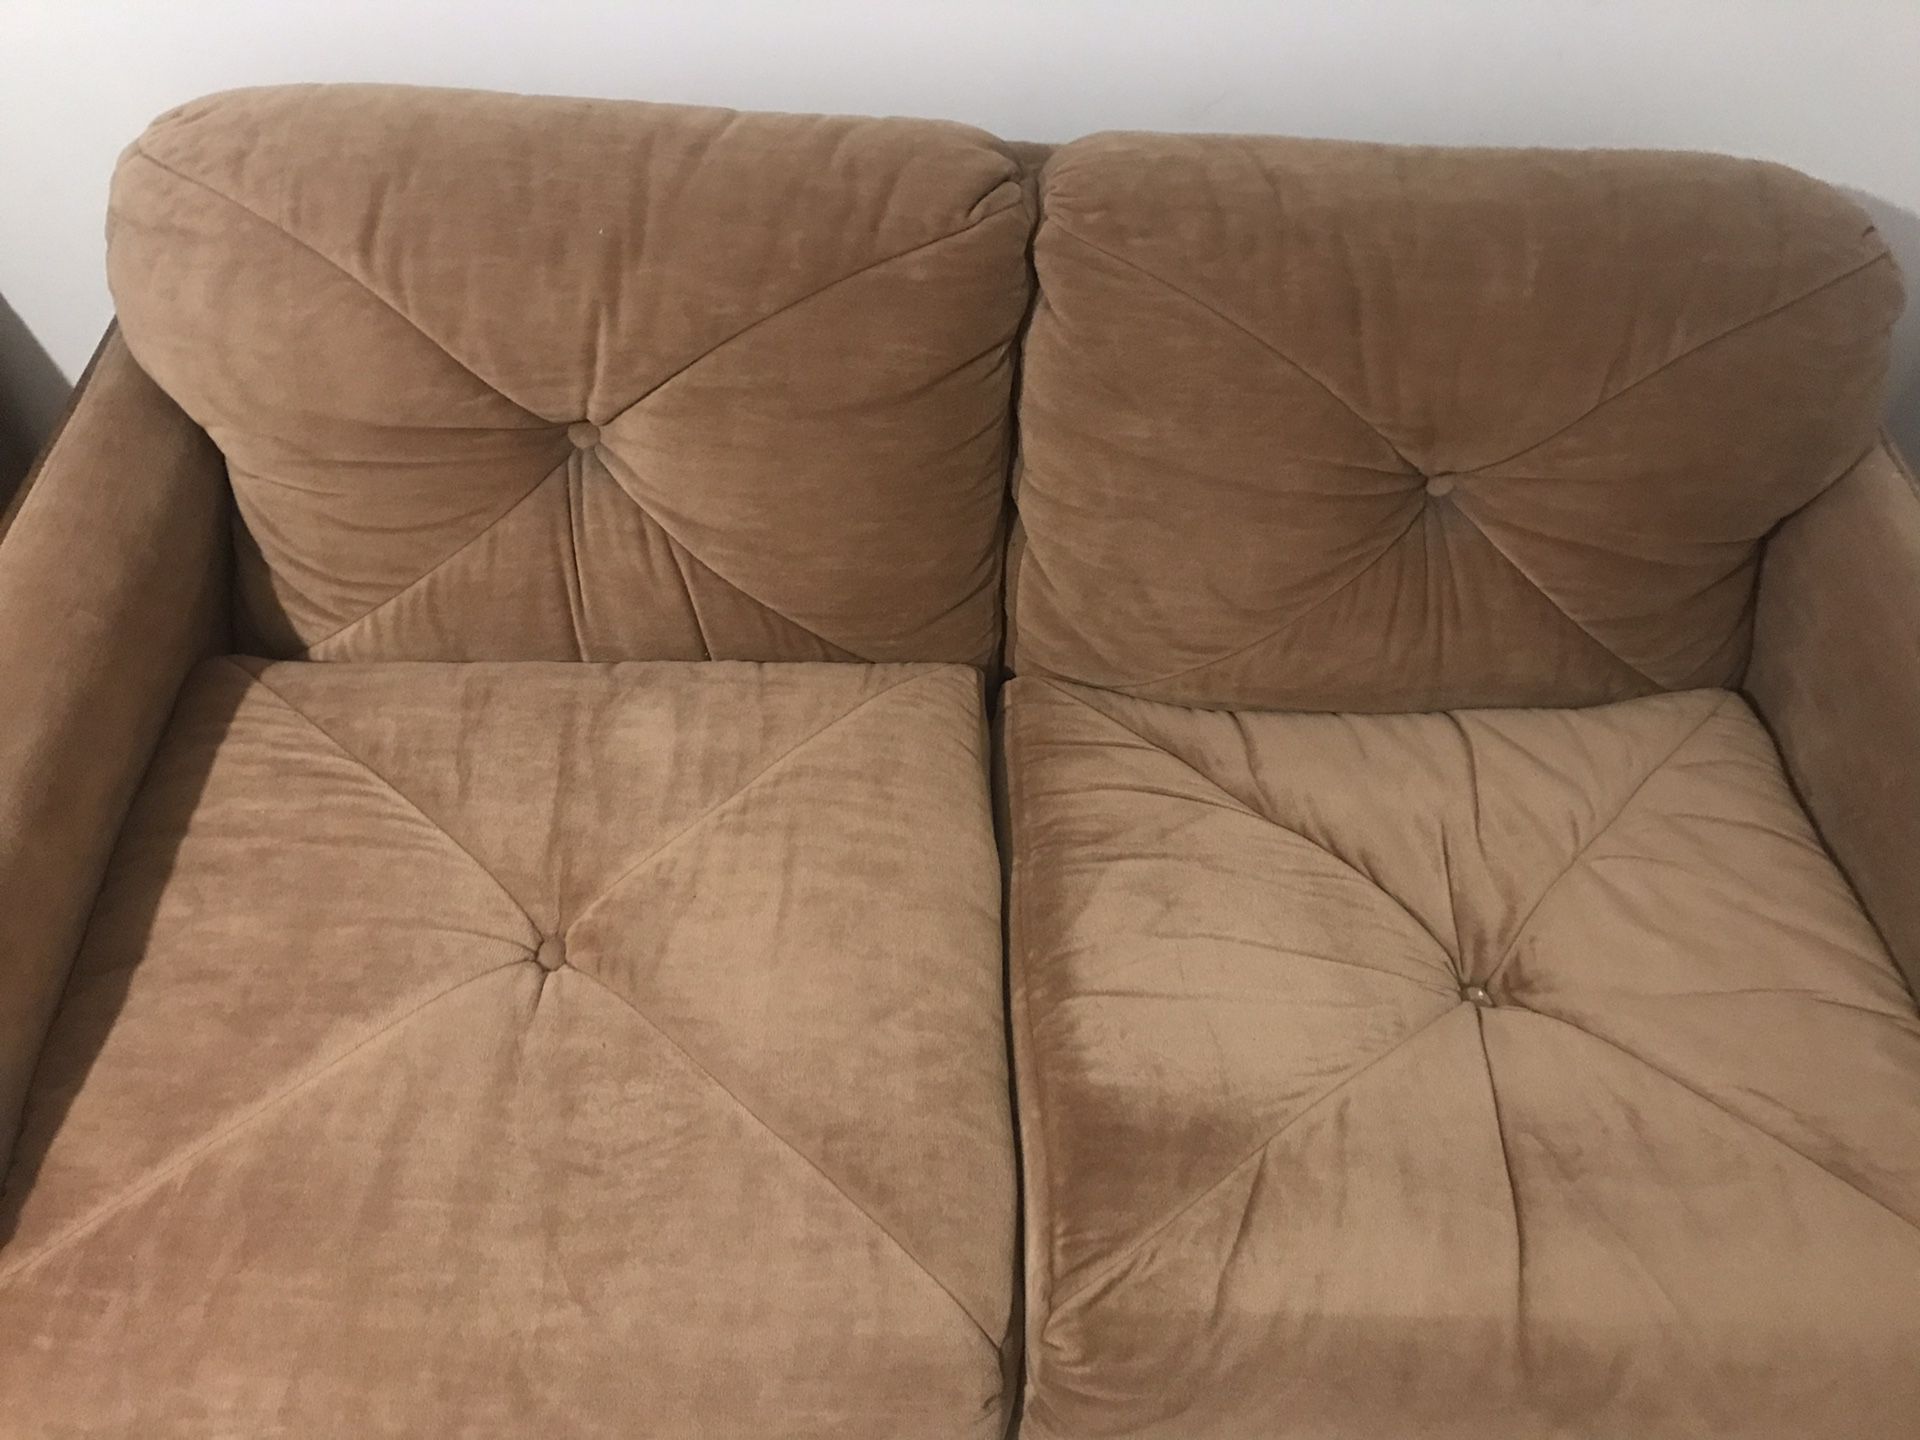 Sofa set, 3 seater, love seat, and single seat, almost new, no stains no pets no smoking and no bugs. Very clean